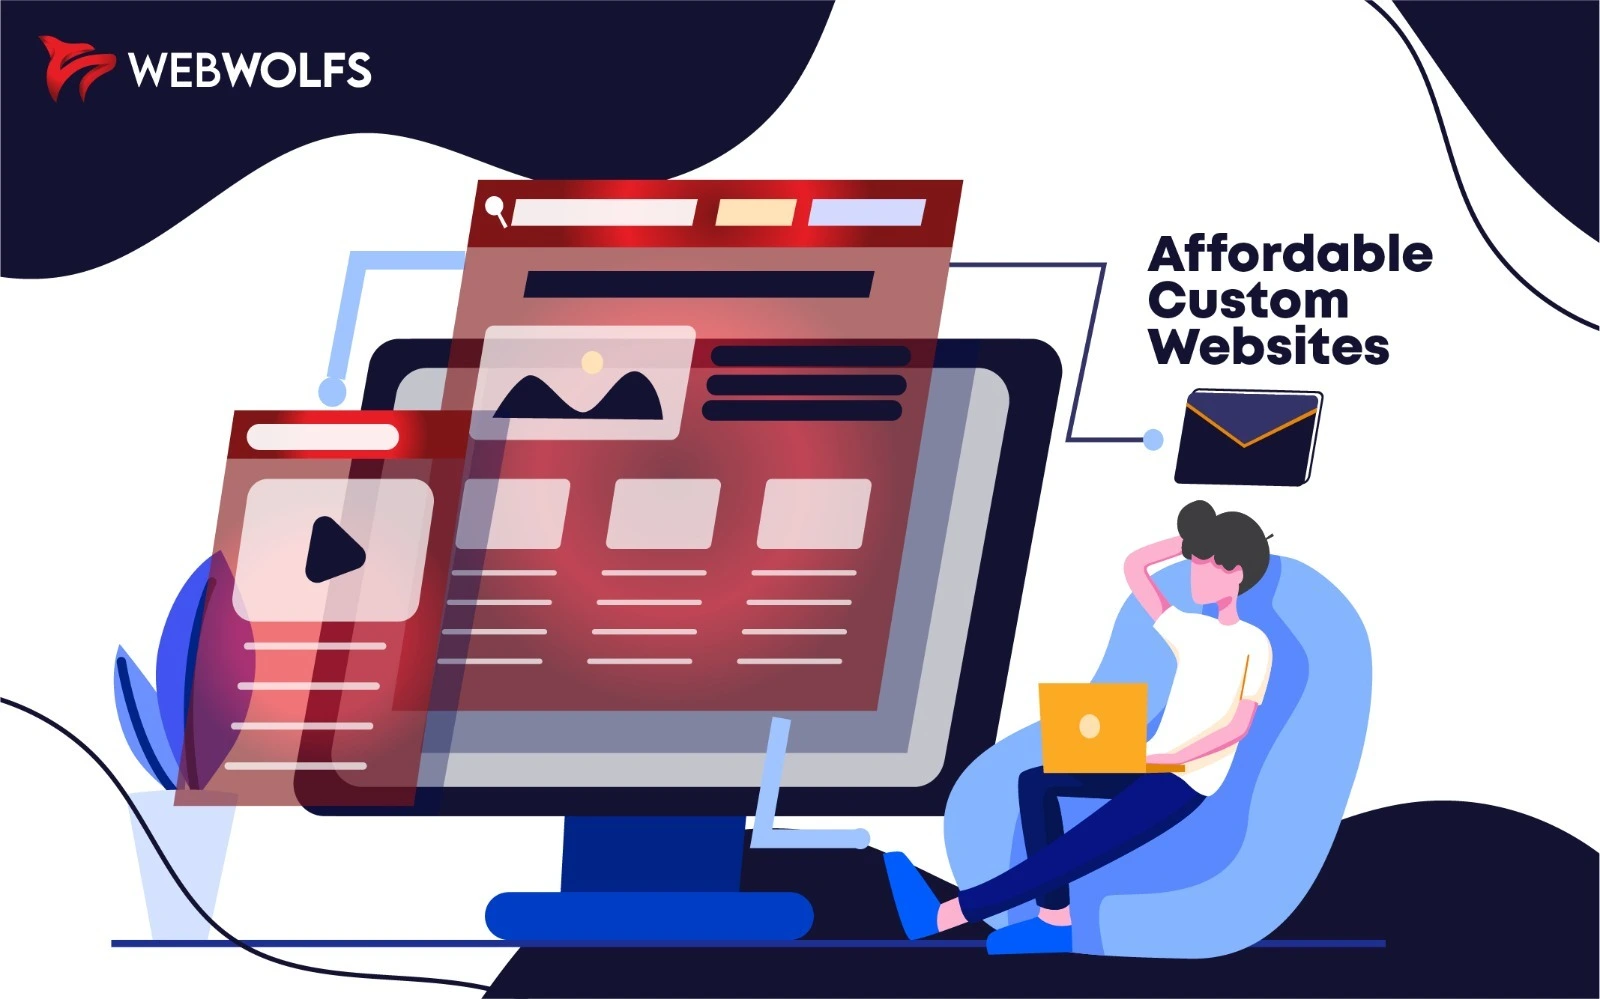 How Much Does It Cost To Build A Custom Website?